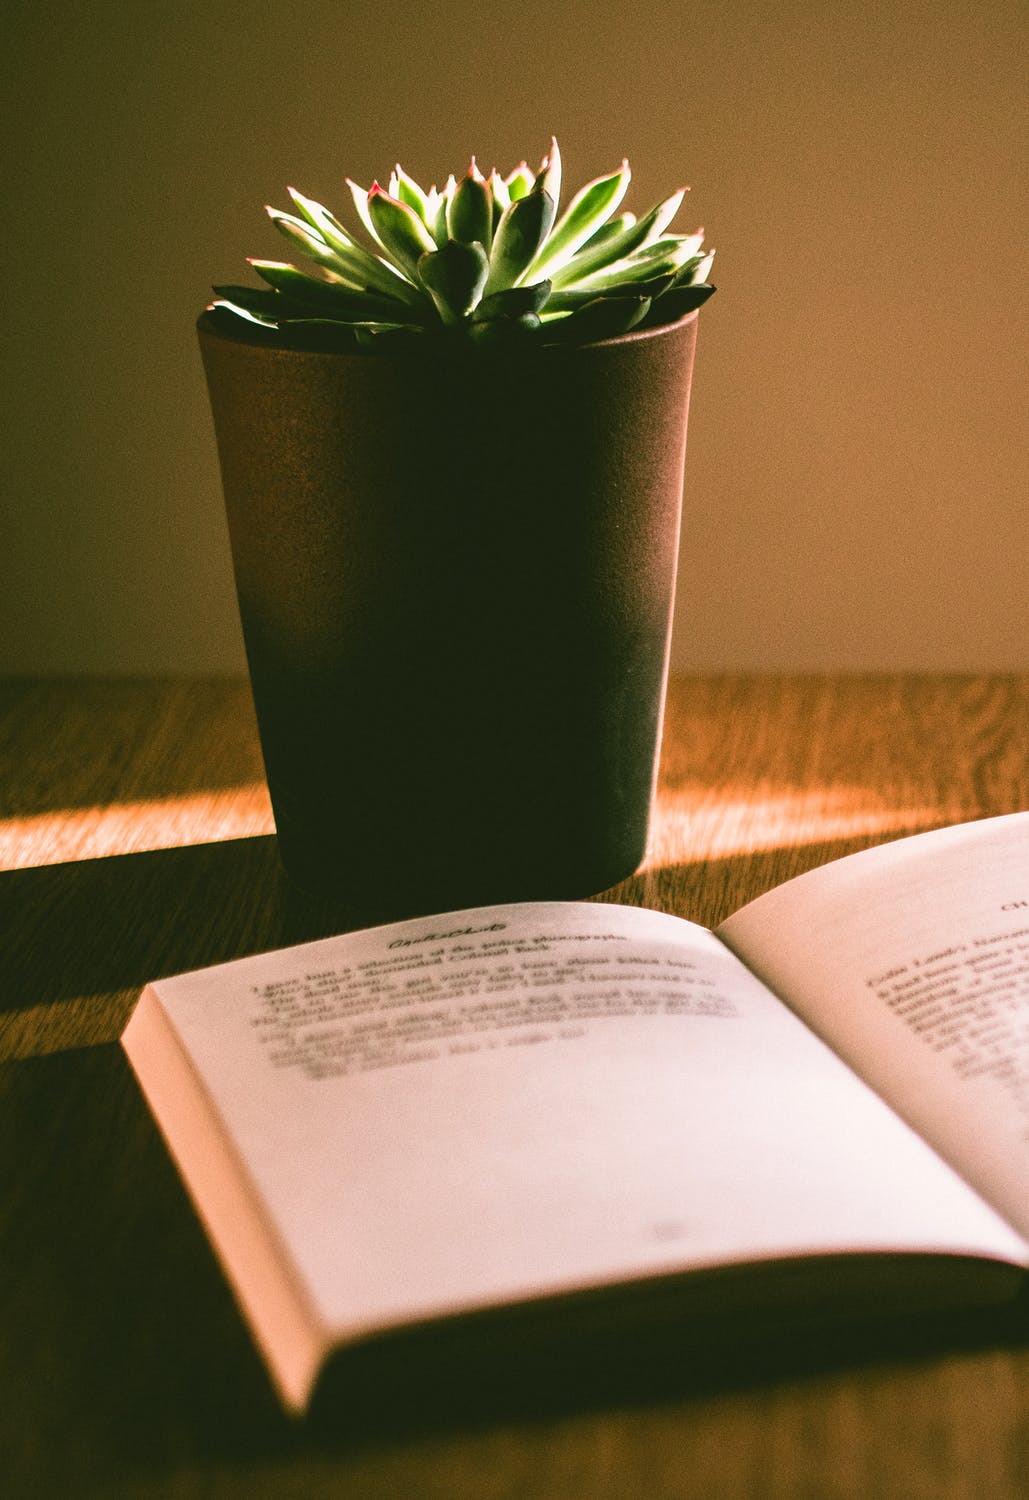 book and potted plant on desk